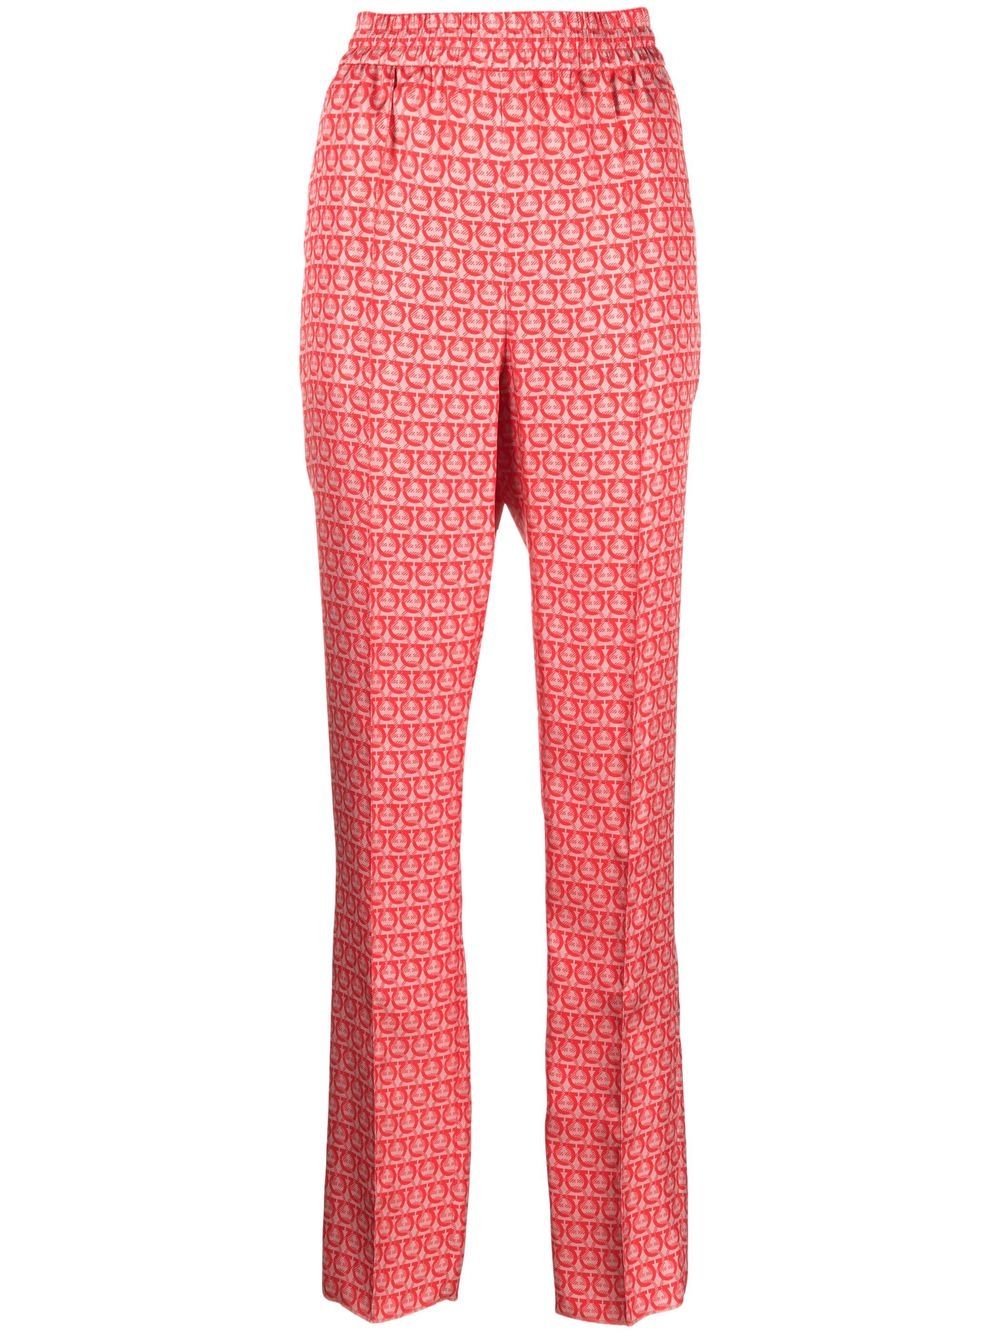 Ferragamo high-waisted trousers - Red